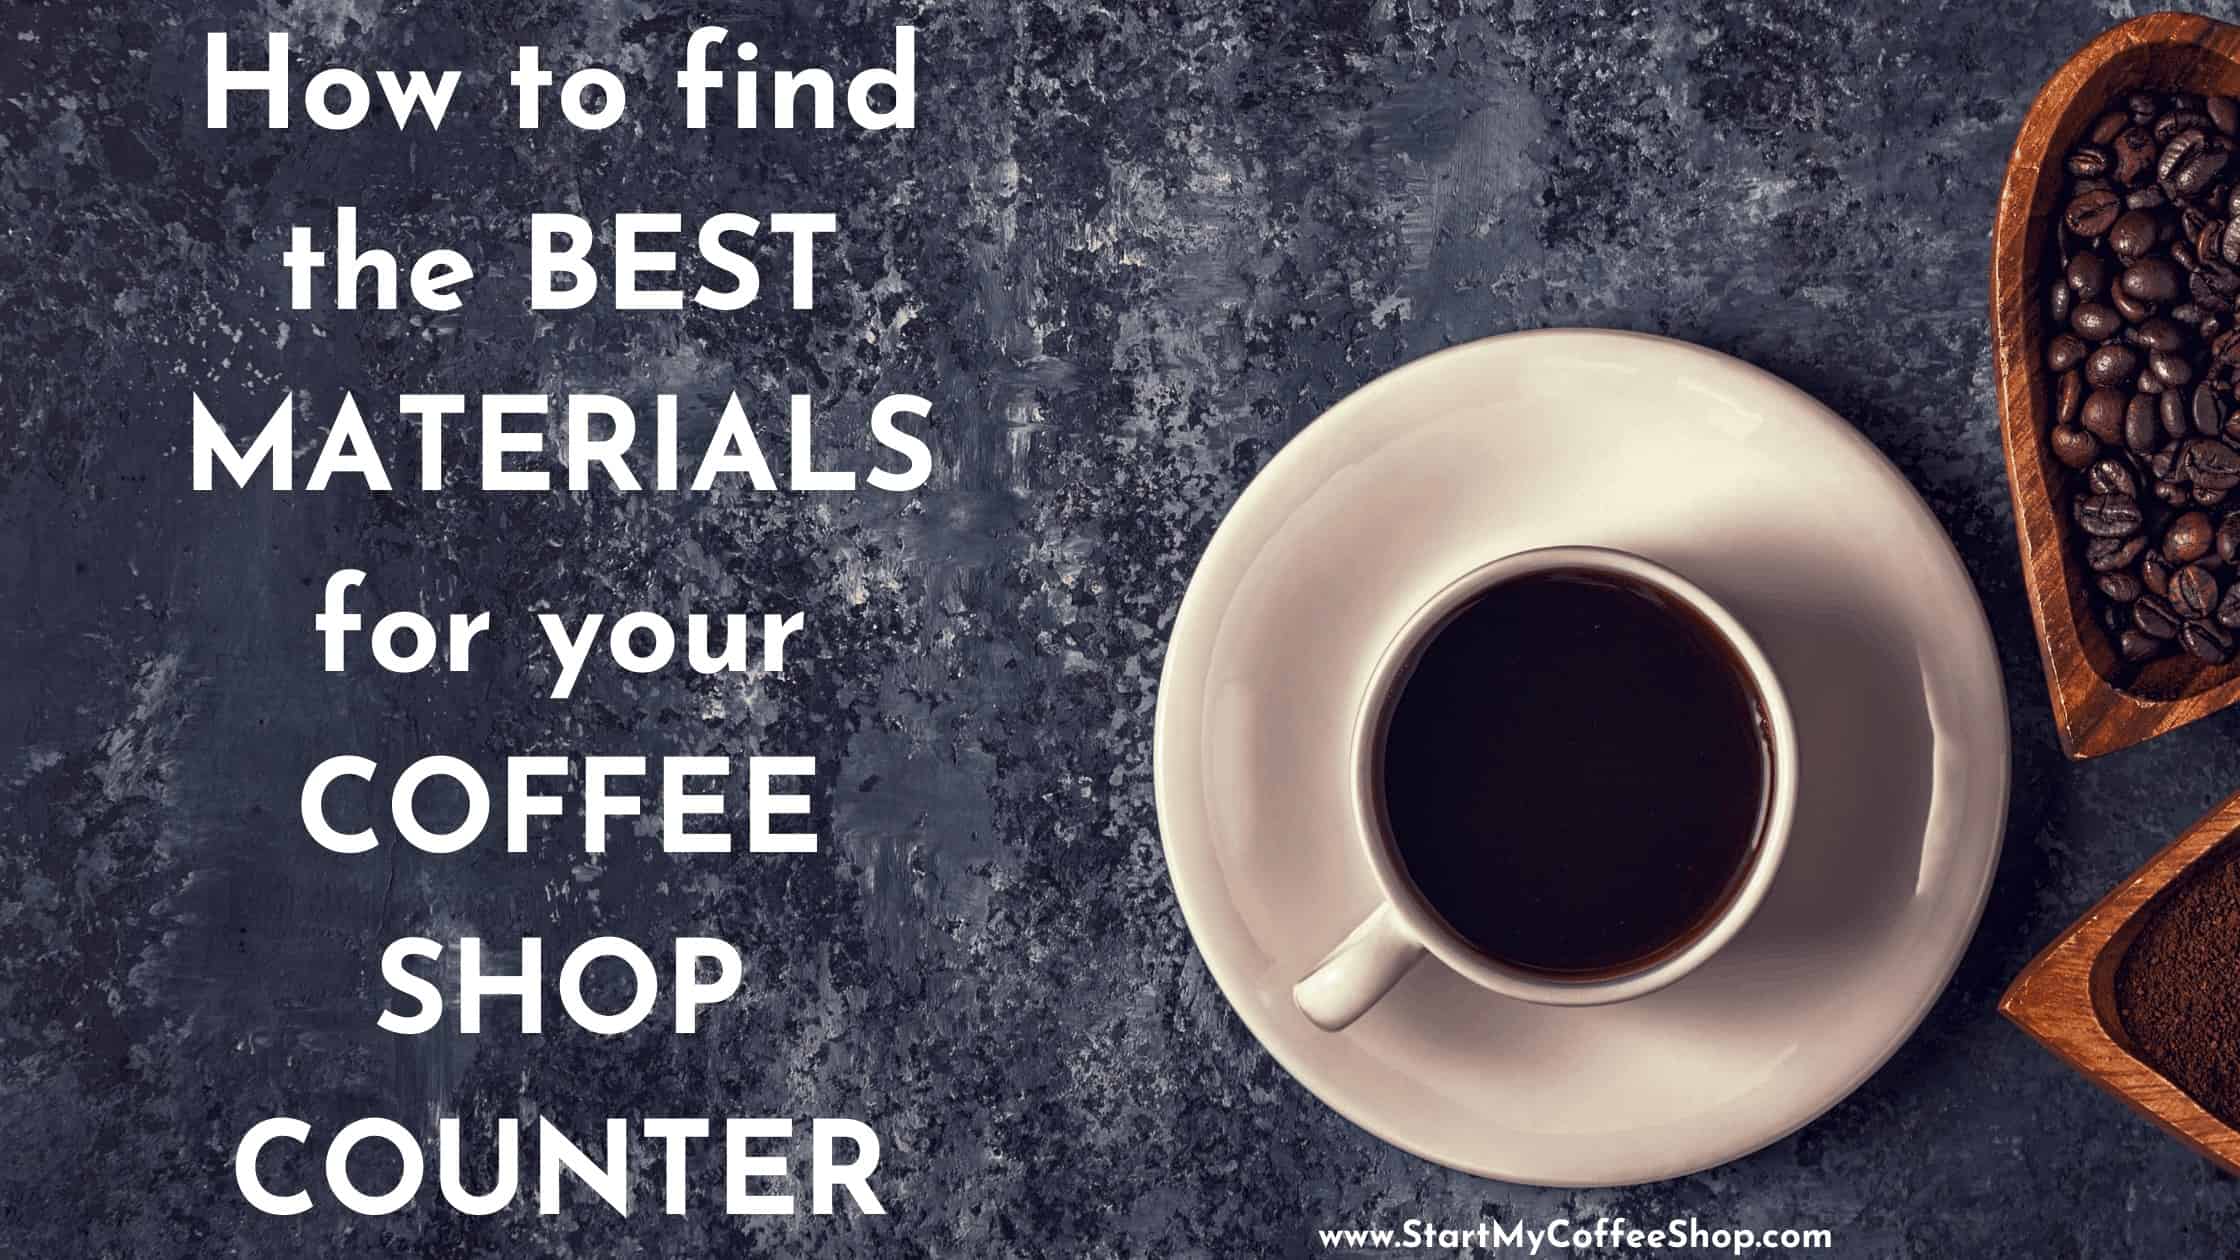 How to find the best materials for your coffee shop counter